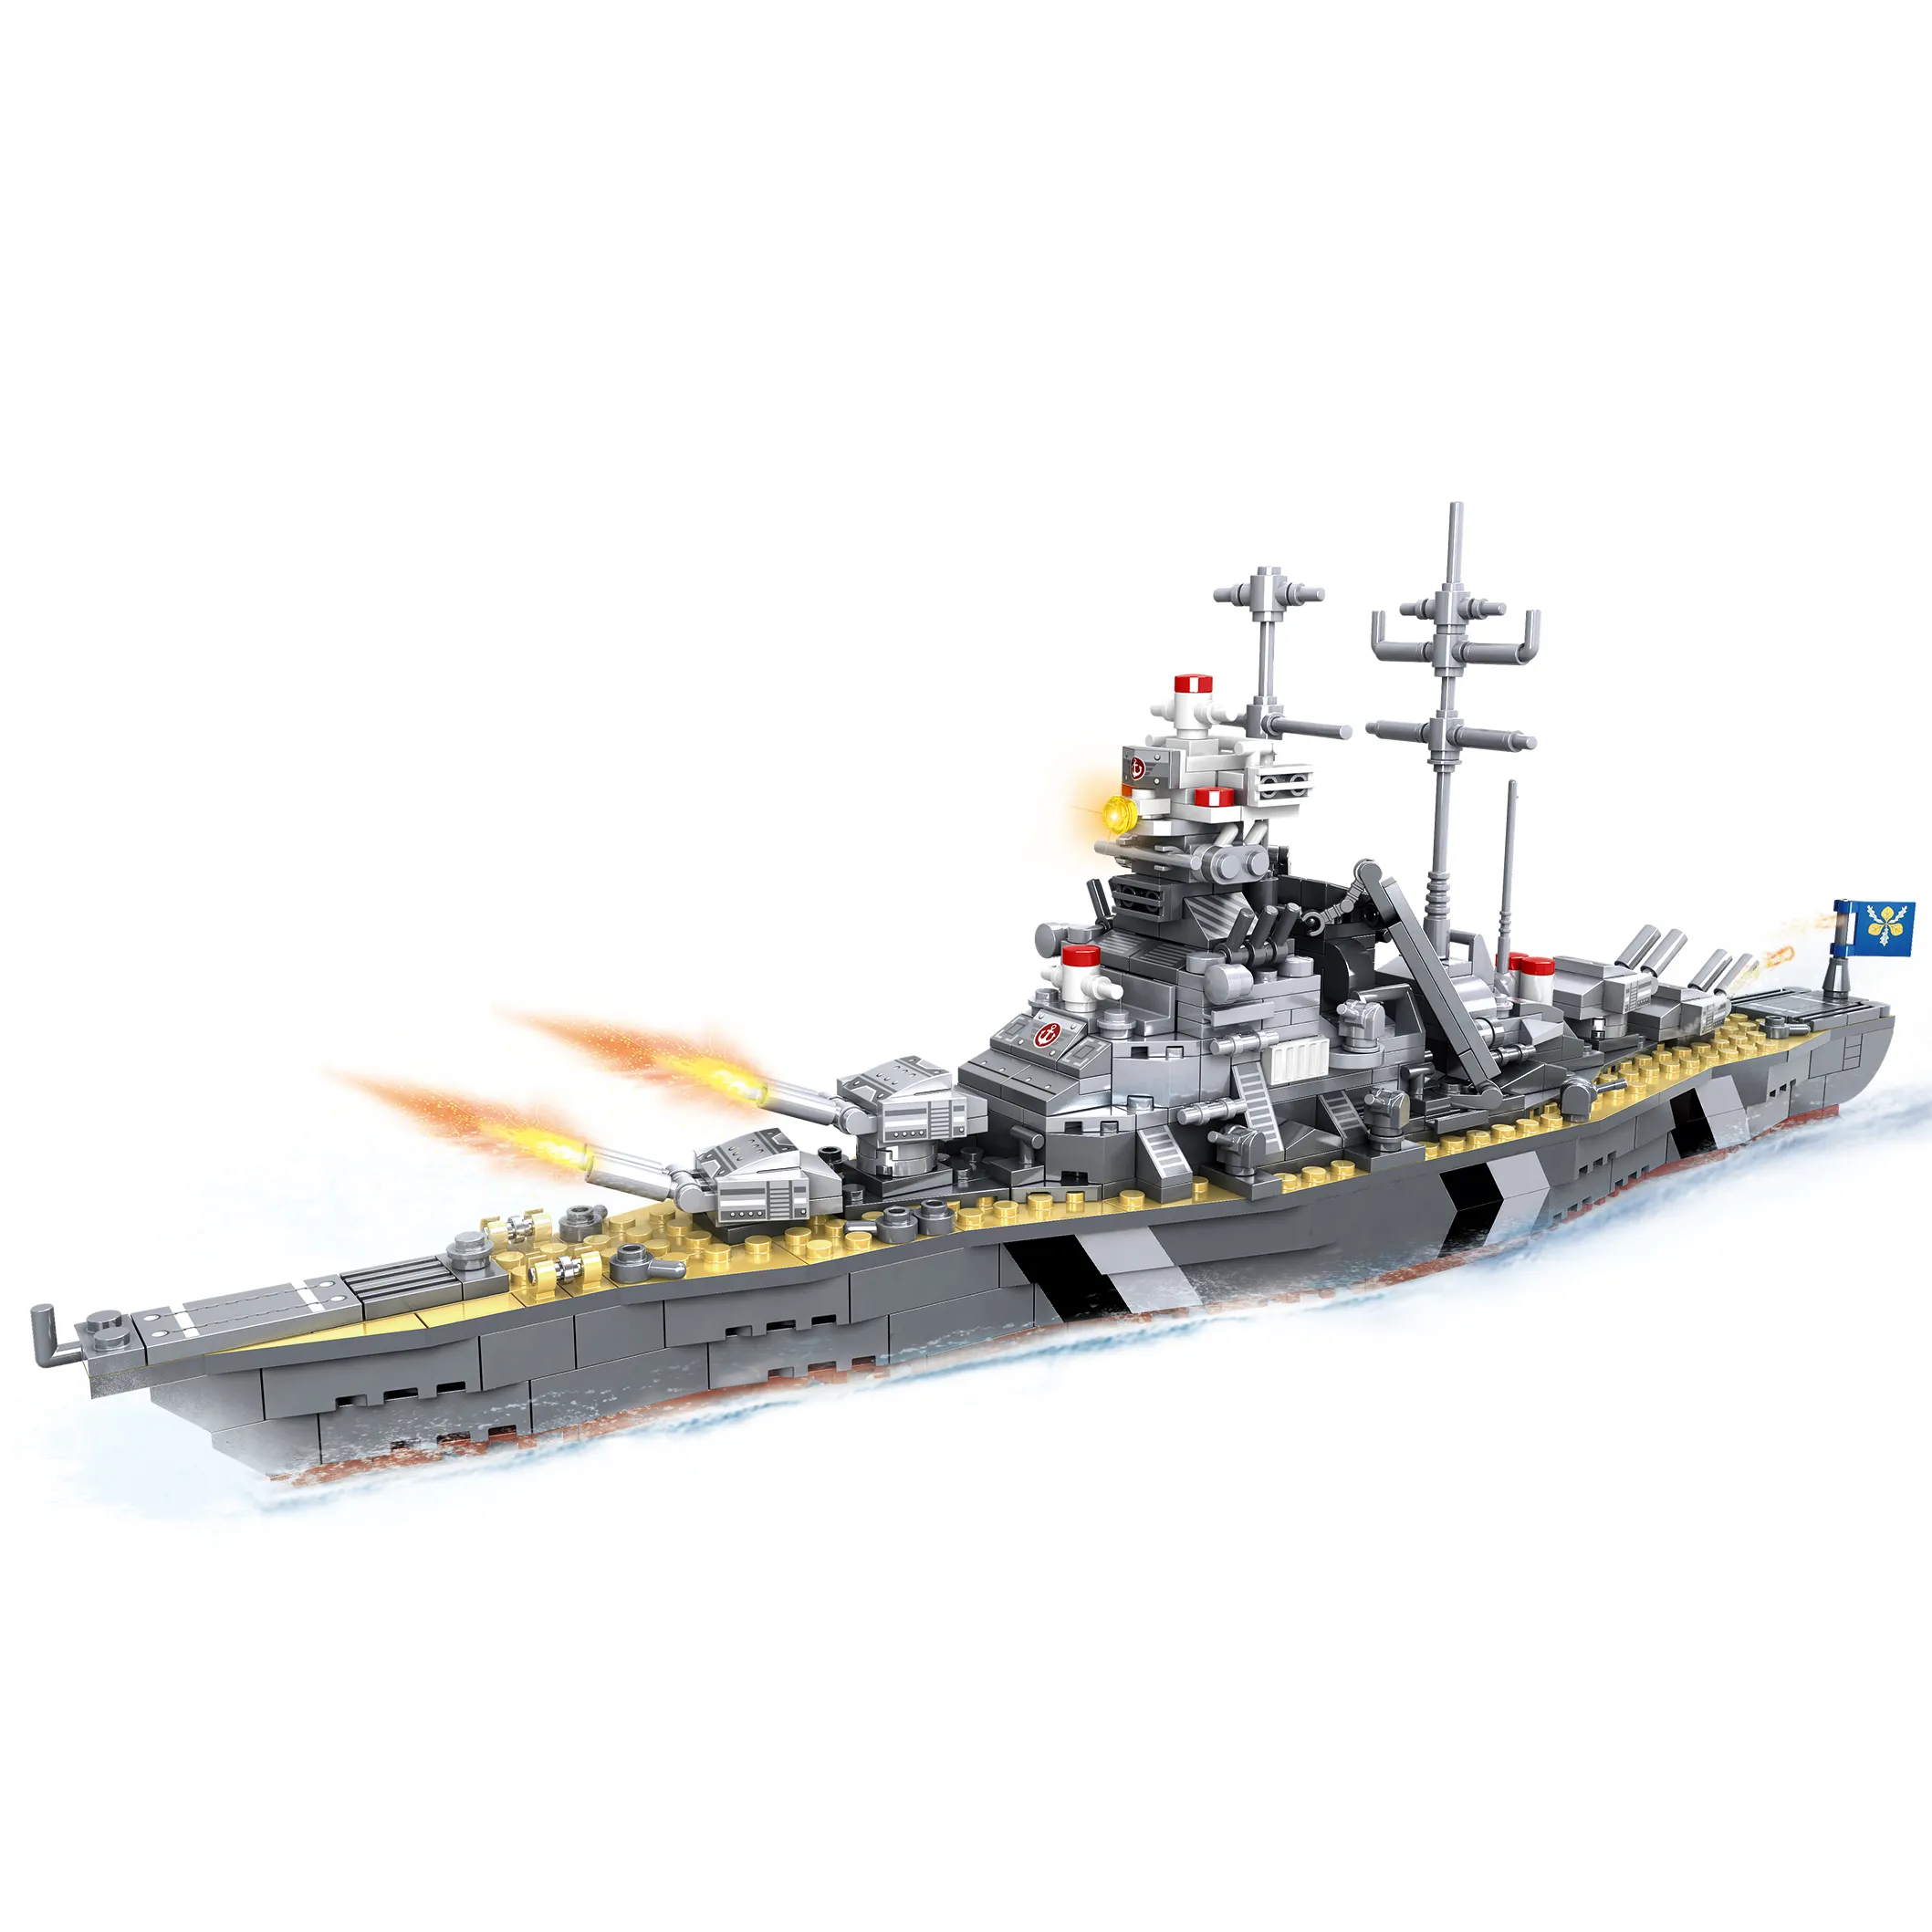 Mini Building block sets legoing boys assemble large military aircraft carrier children's educational toy model cruiser